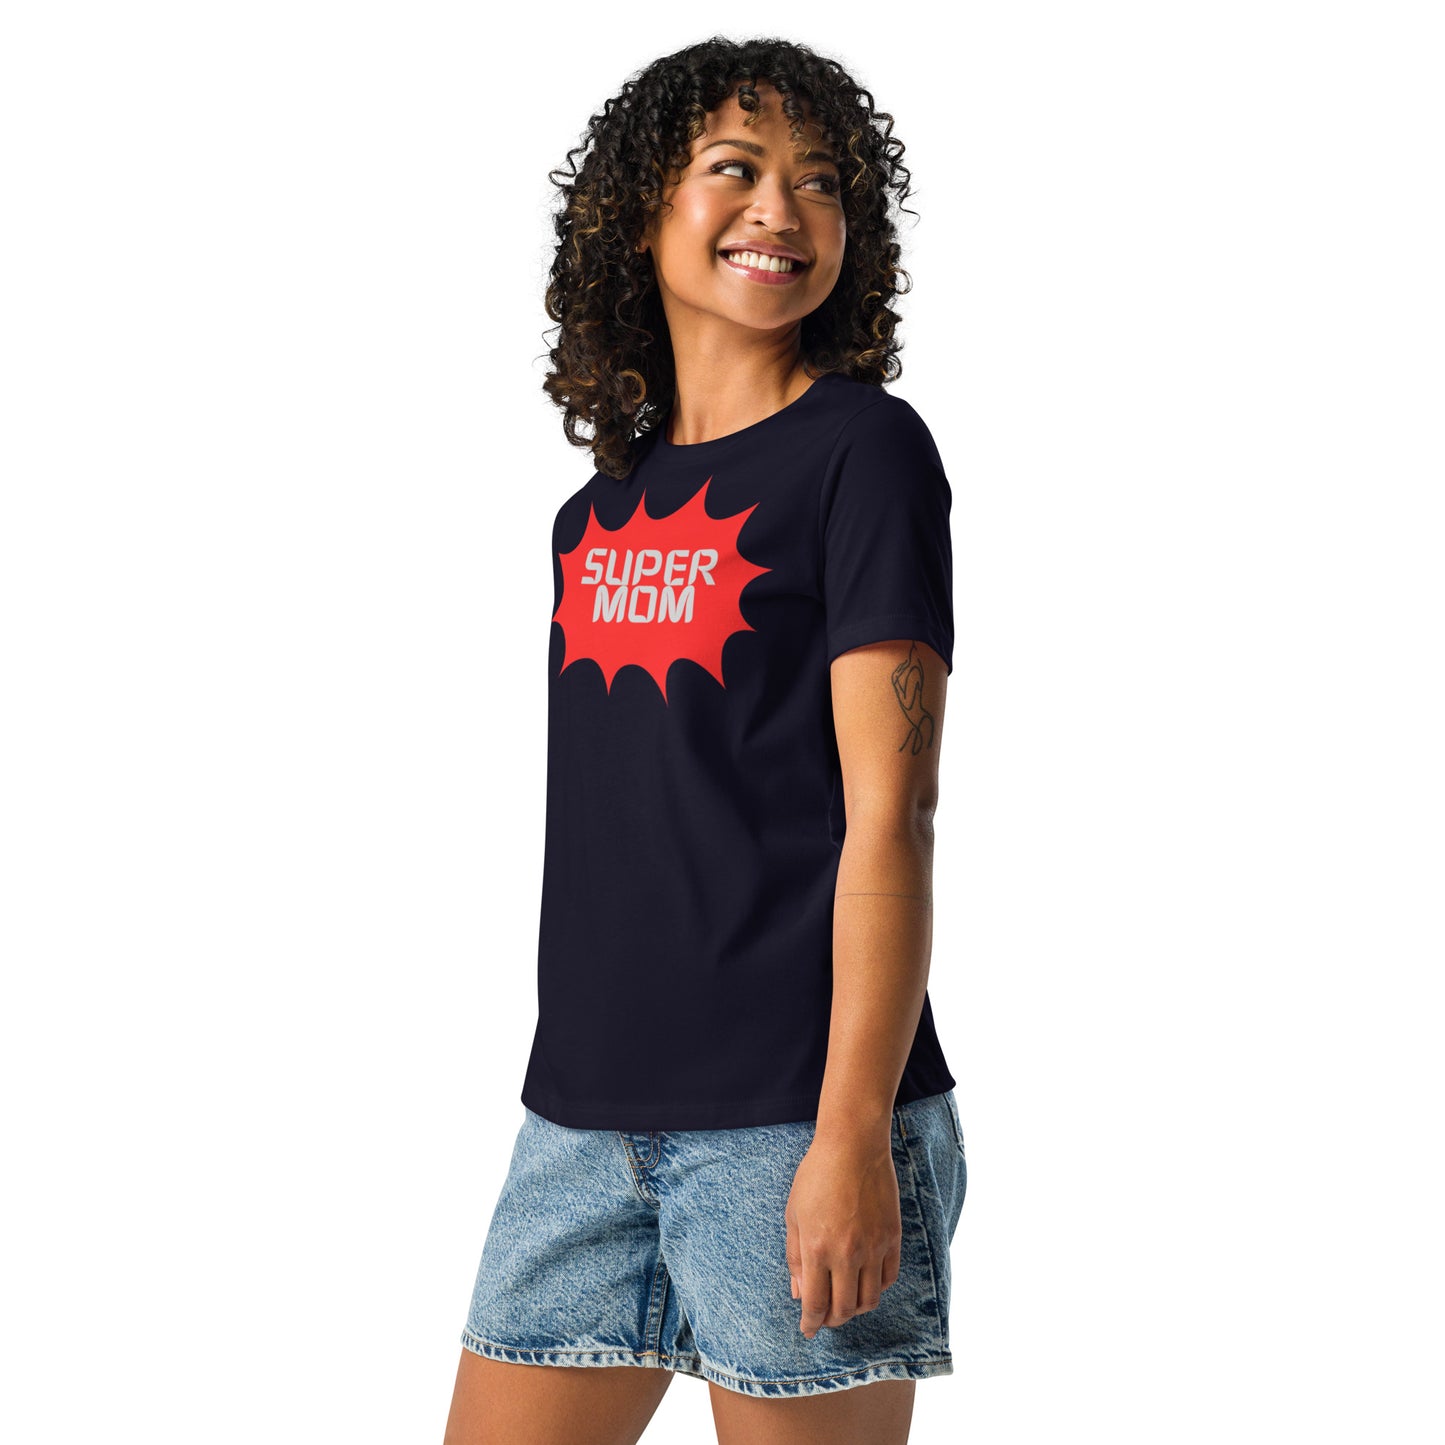 "Super Mom" Relaxed T-Shirt